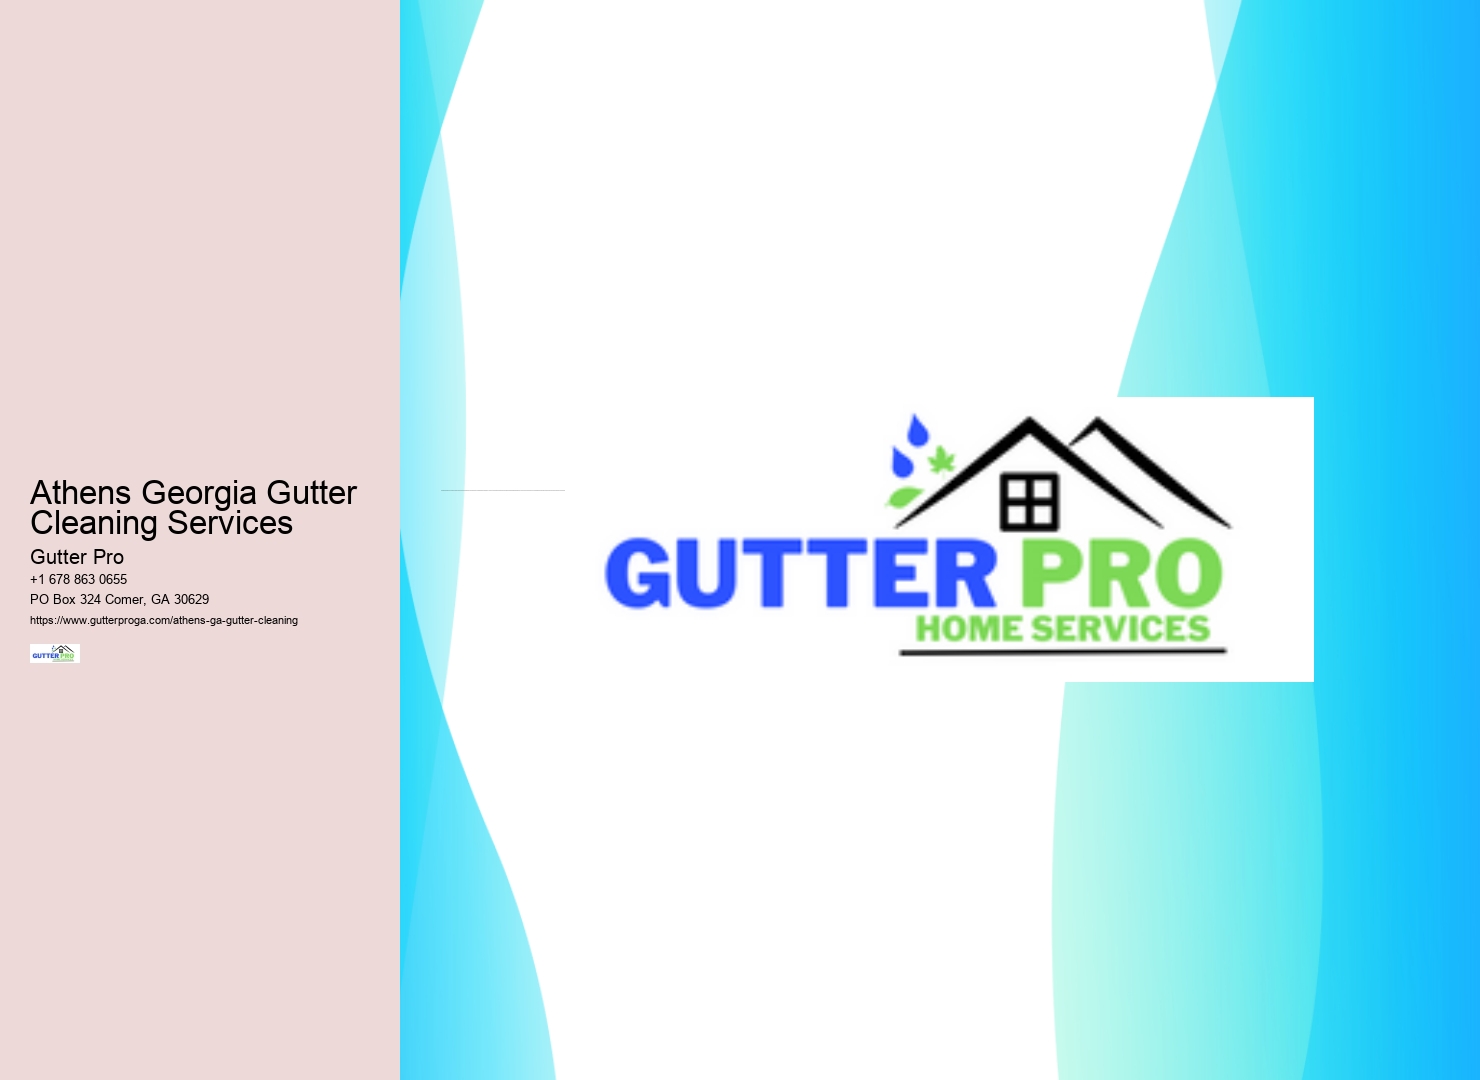 Athens Georgia Gutter Cleaning Services